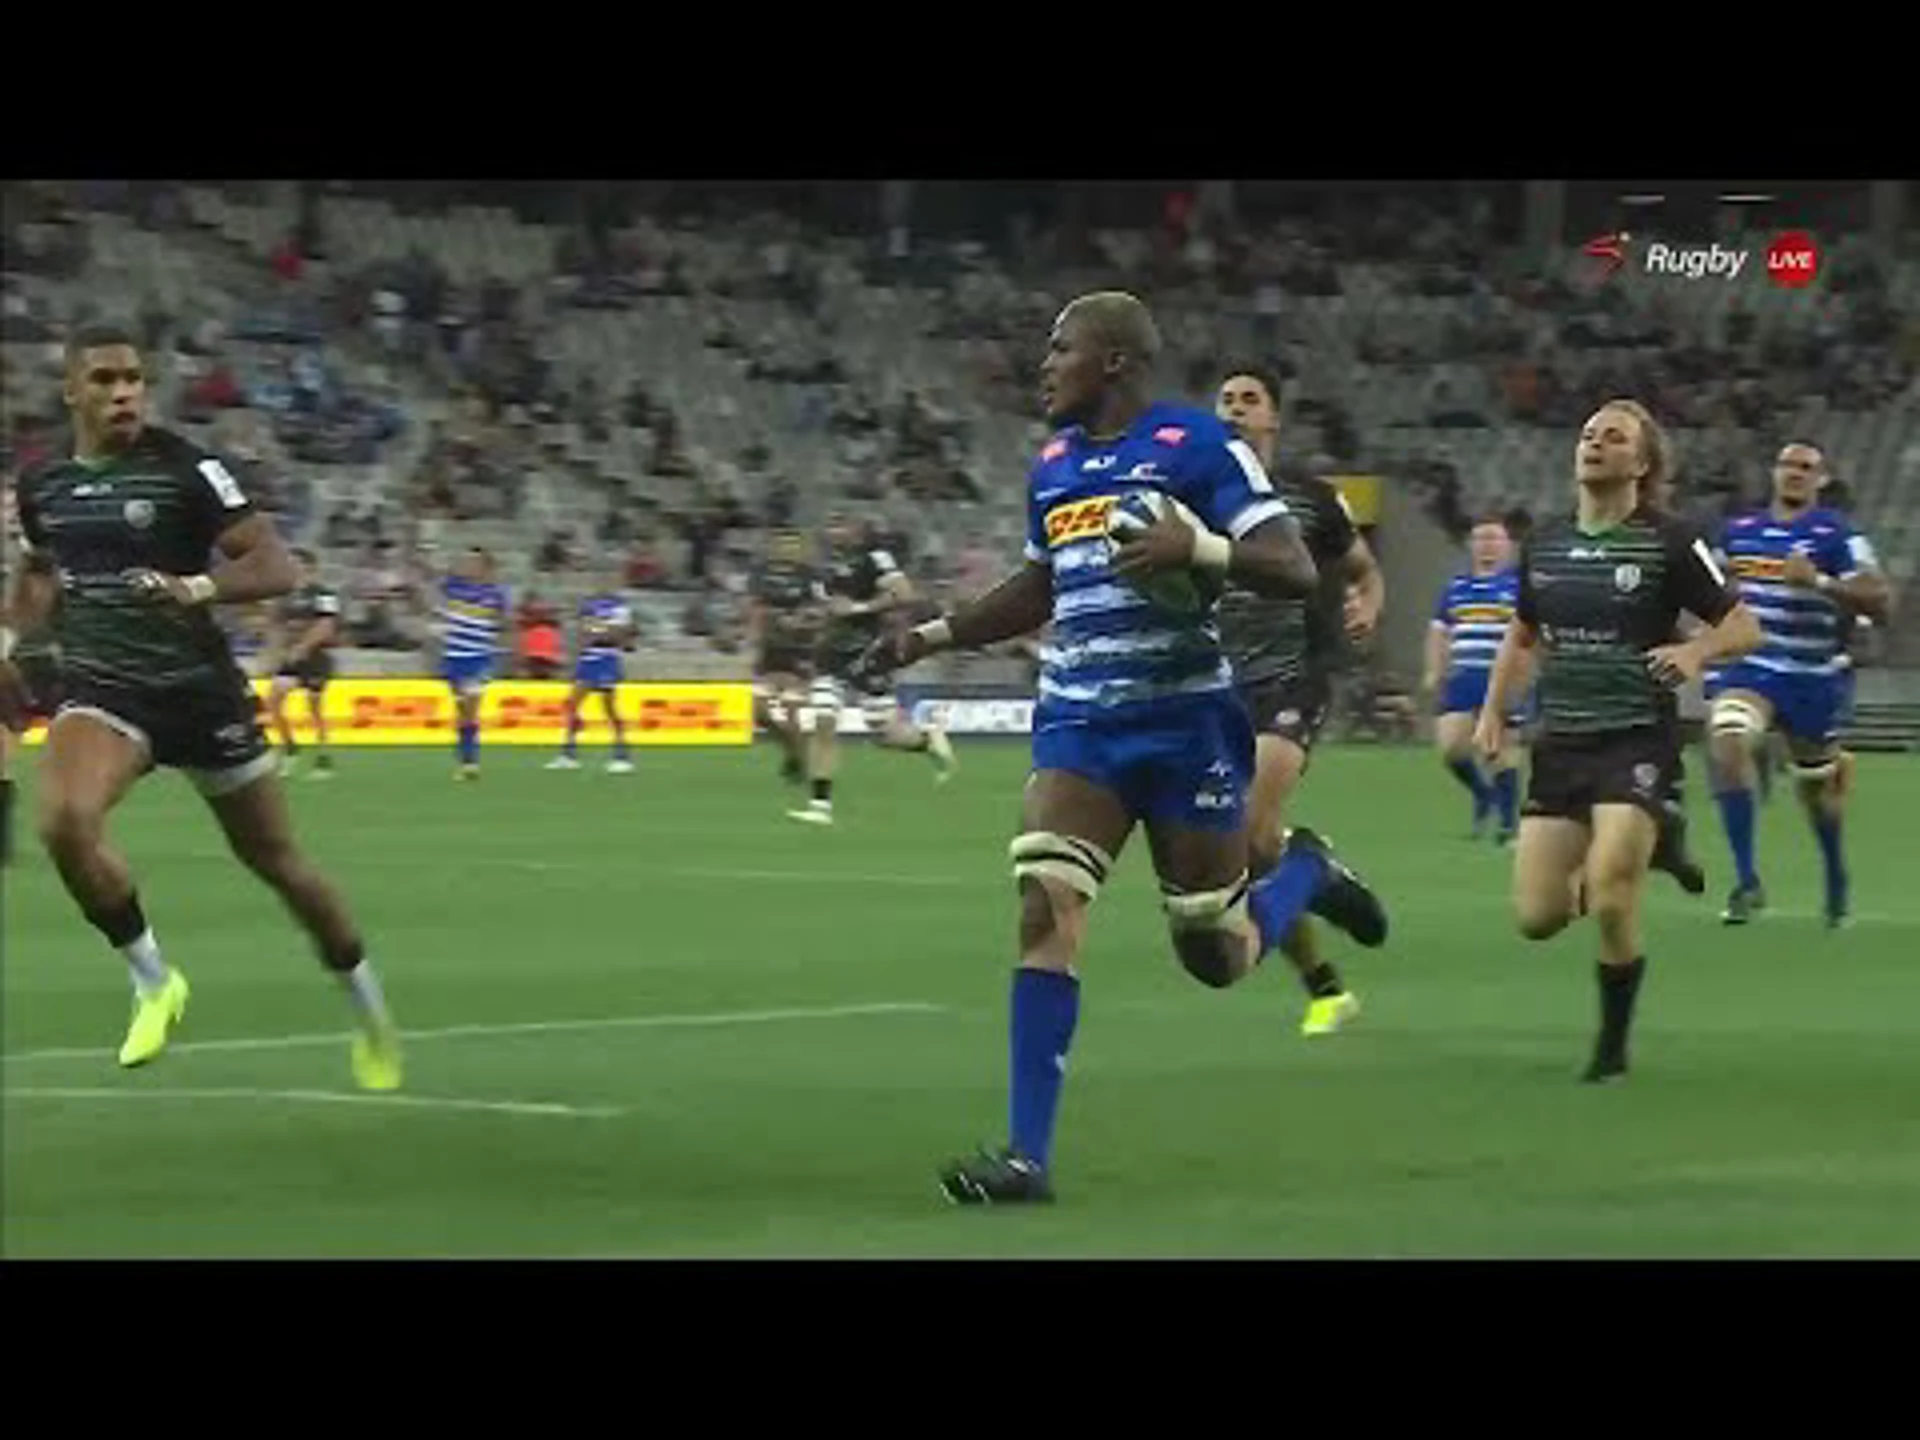 Champions Cup | Hacjivah Dayimani - With a Try vs. London Irish